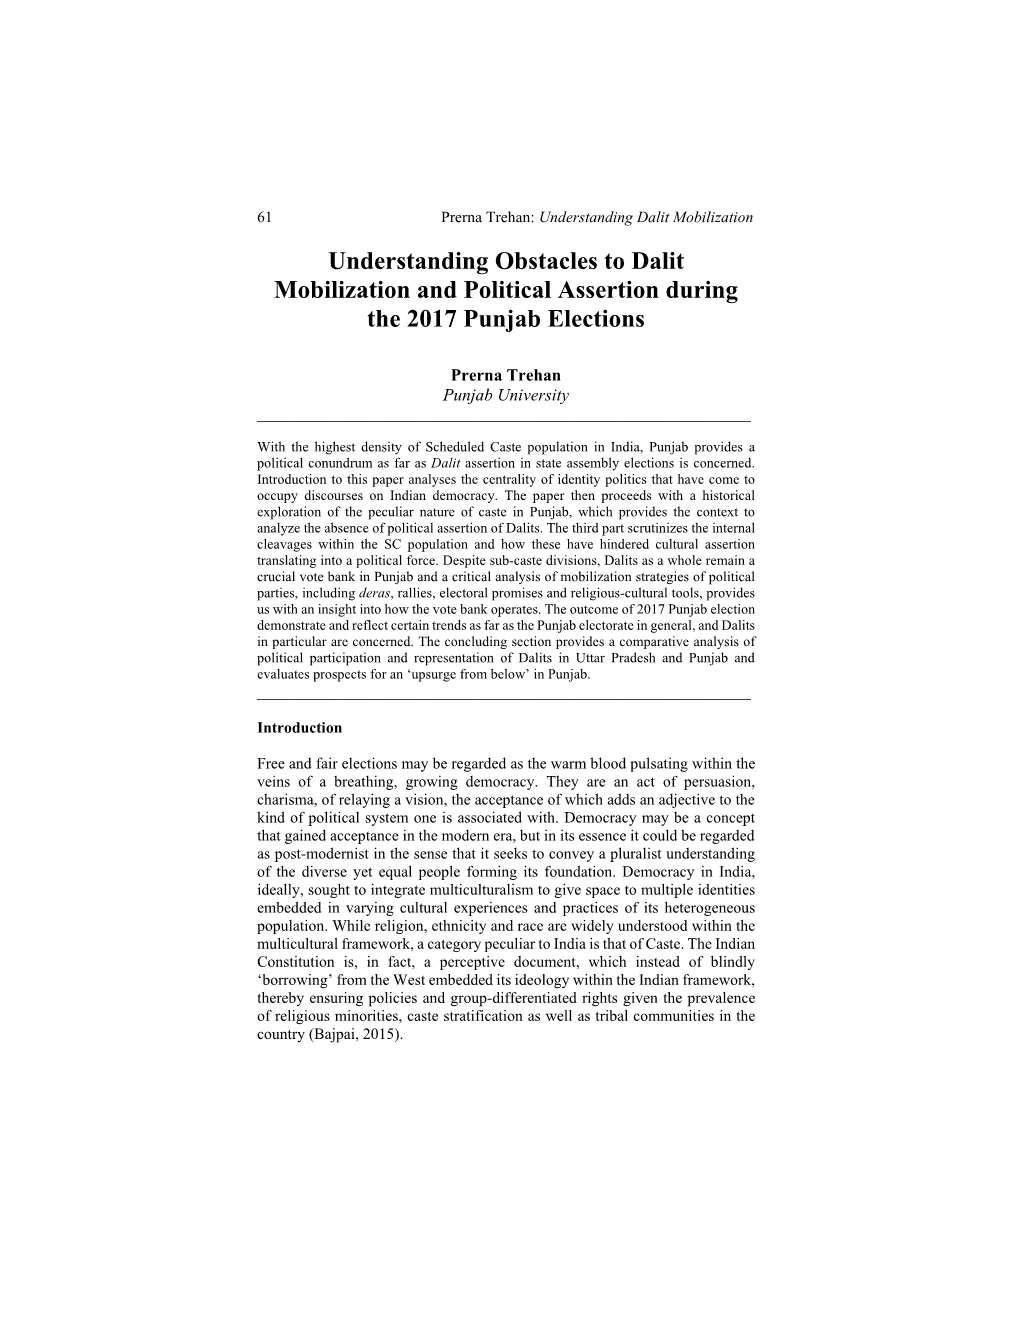 Understanding Obstacles to Dalit Mobilization and Political Assertion During the 2017 Punjab Elections